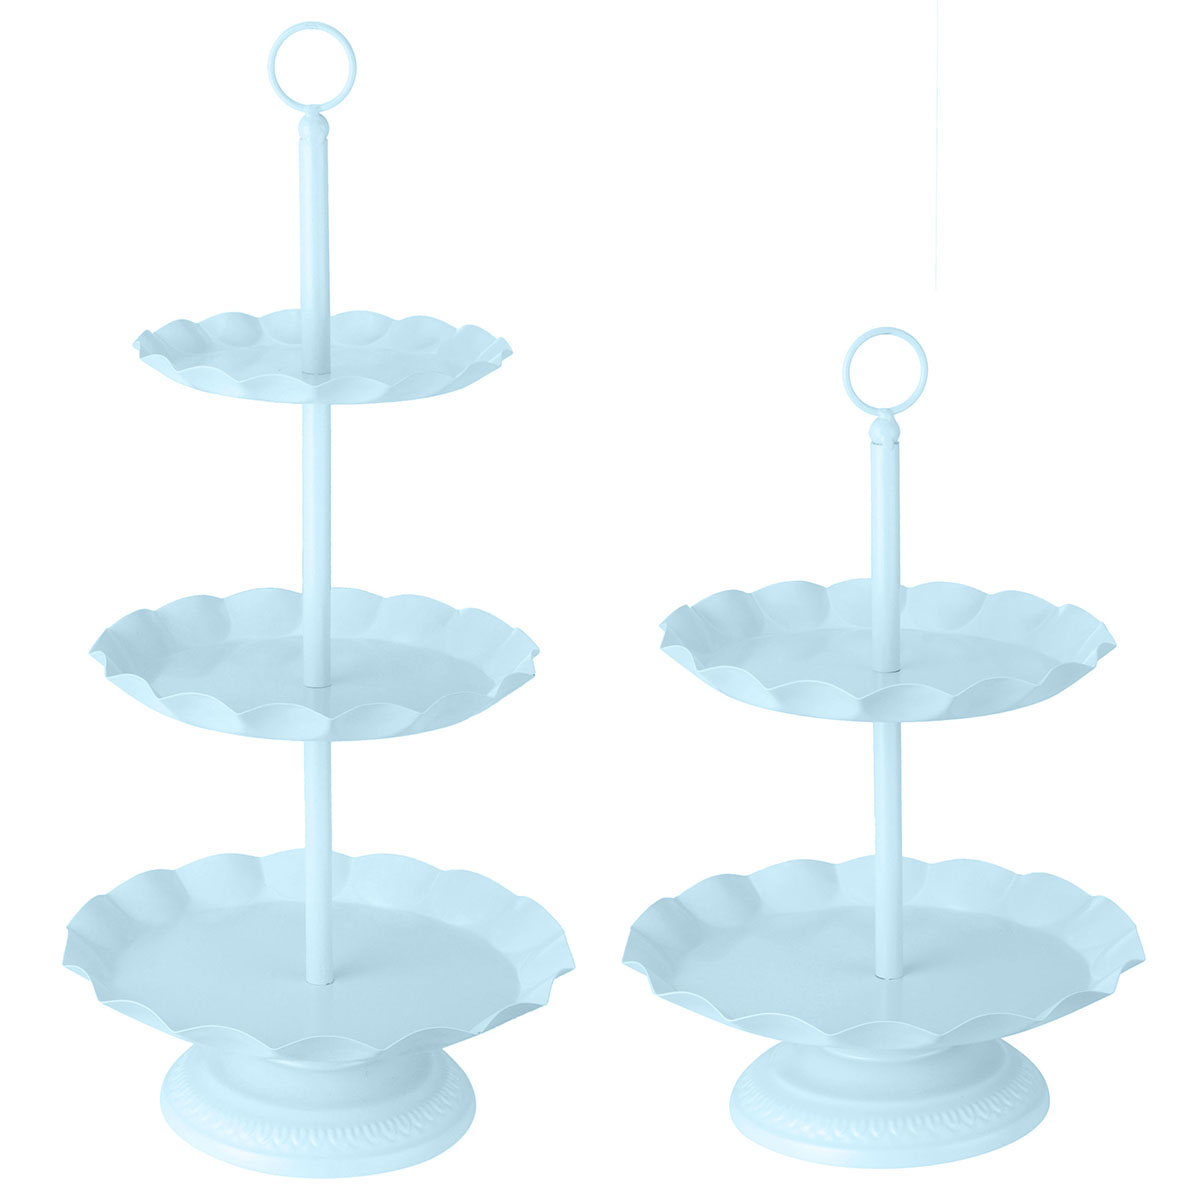 2--3-Ters-Blue-Cake-Holder-Cupcake-Stand-Birthday-Wedding-Party-Display-Holder-Decorations-1340743-7